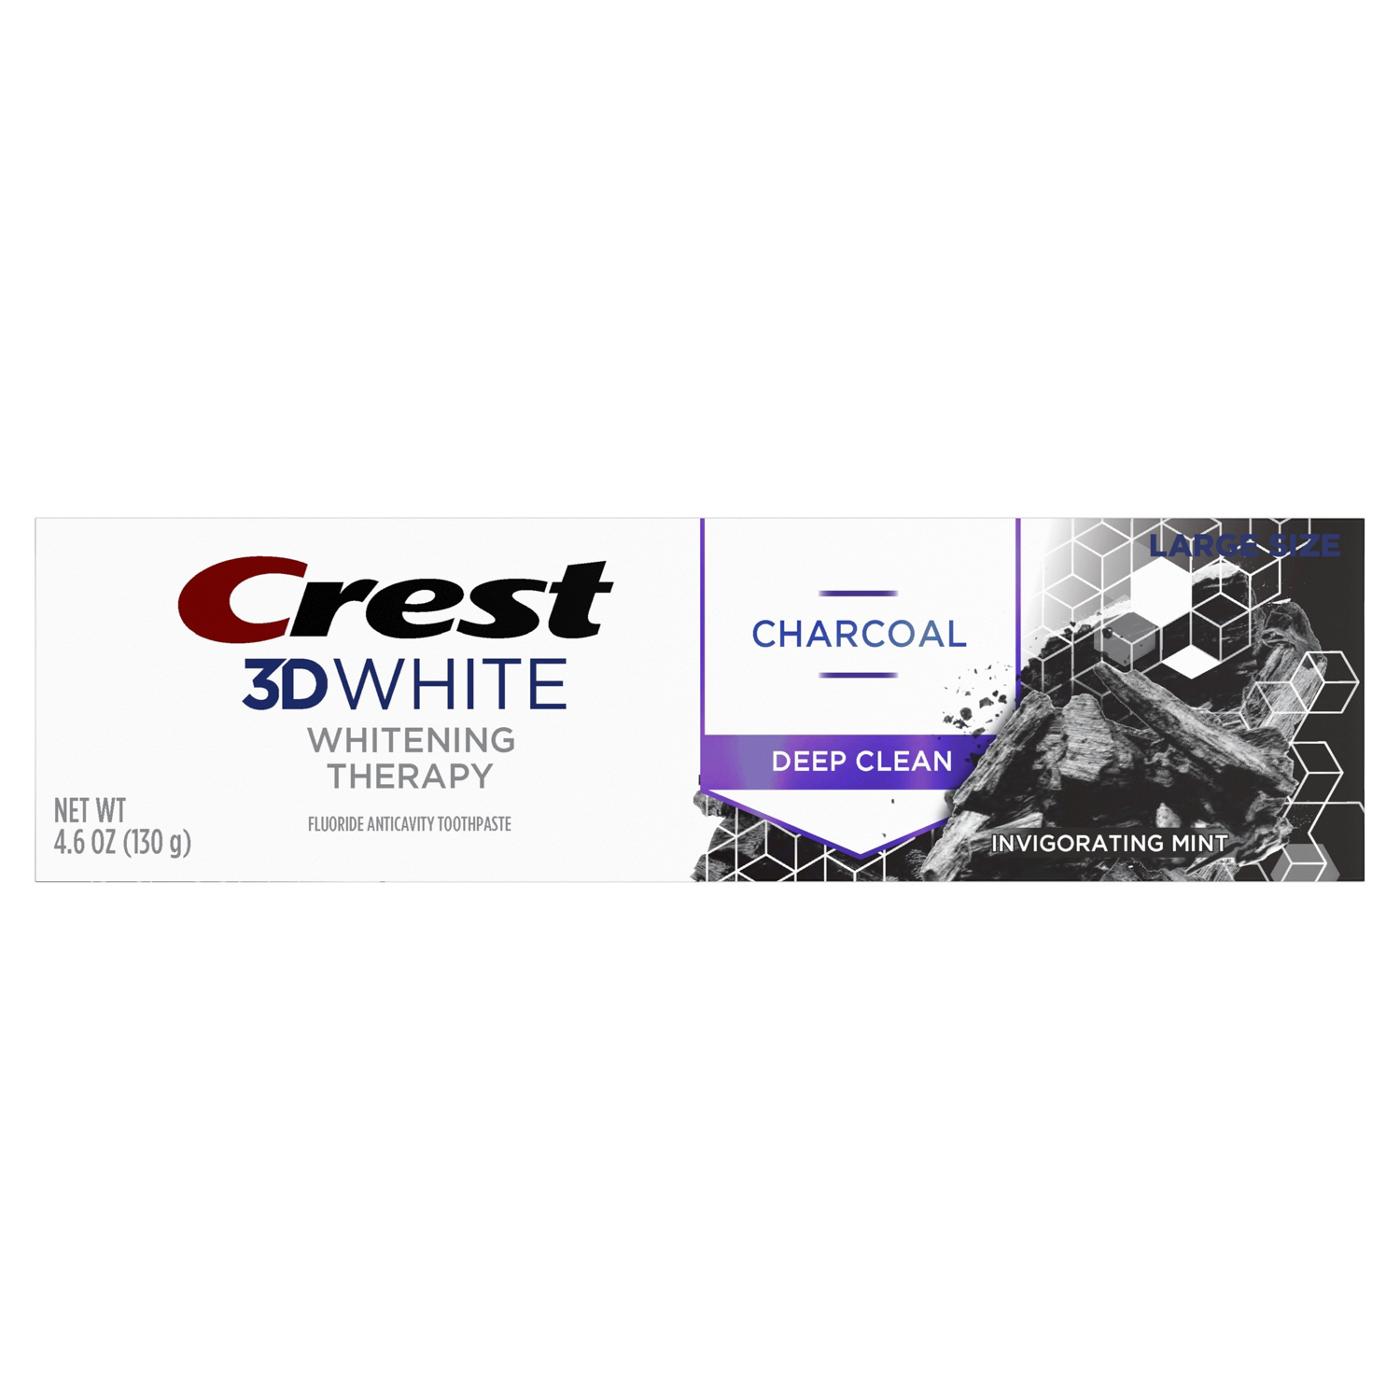 Crest 3D White Whitening Therapy Charcoal Toothpaste - Deep Clean; image 1 of 8